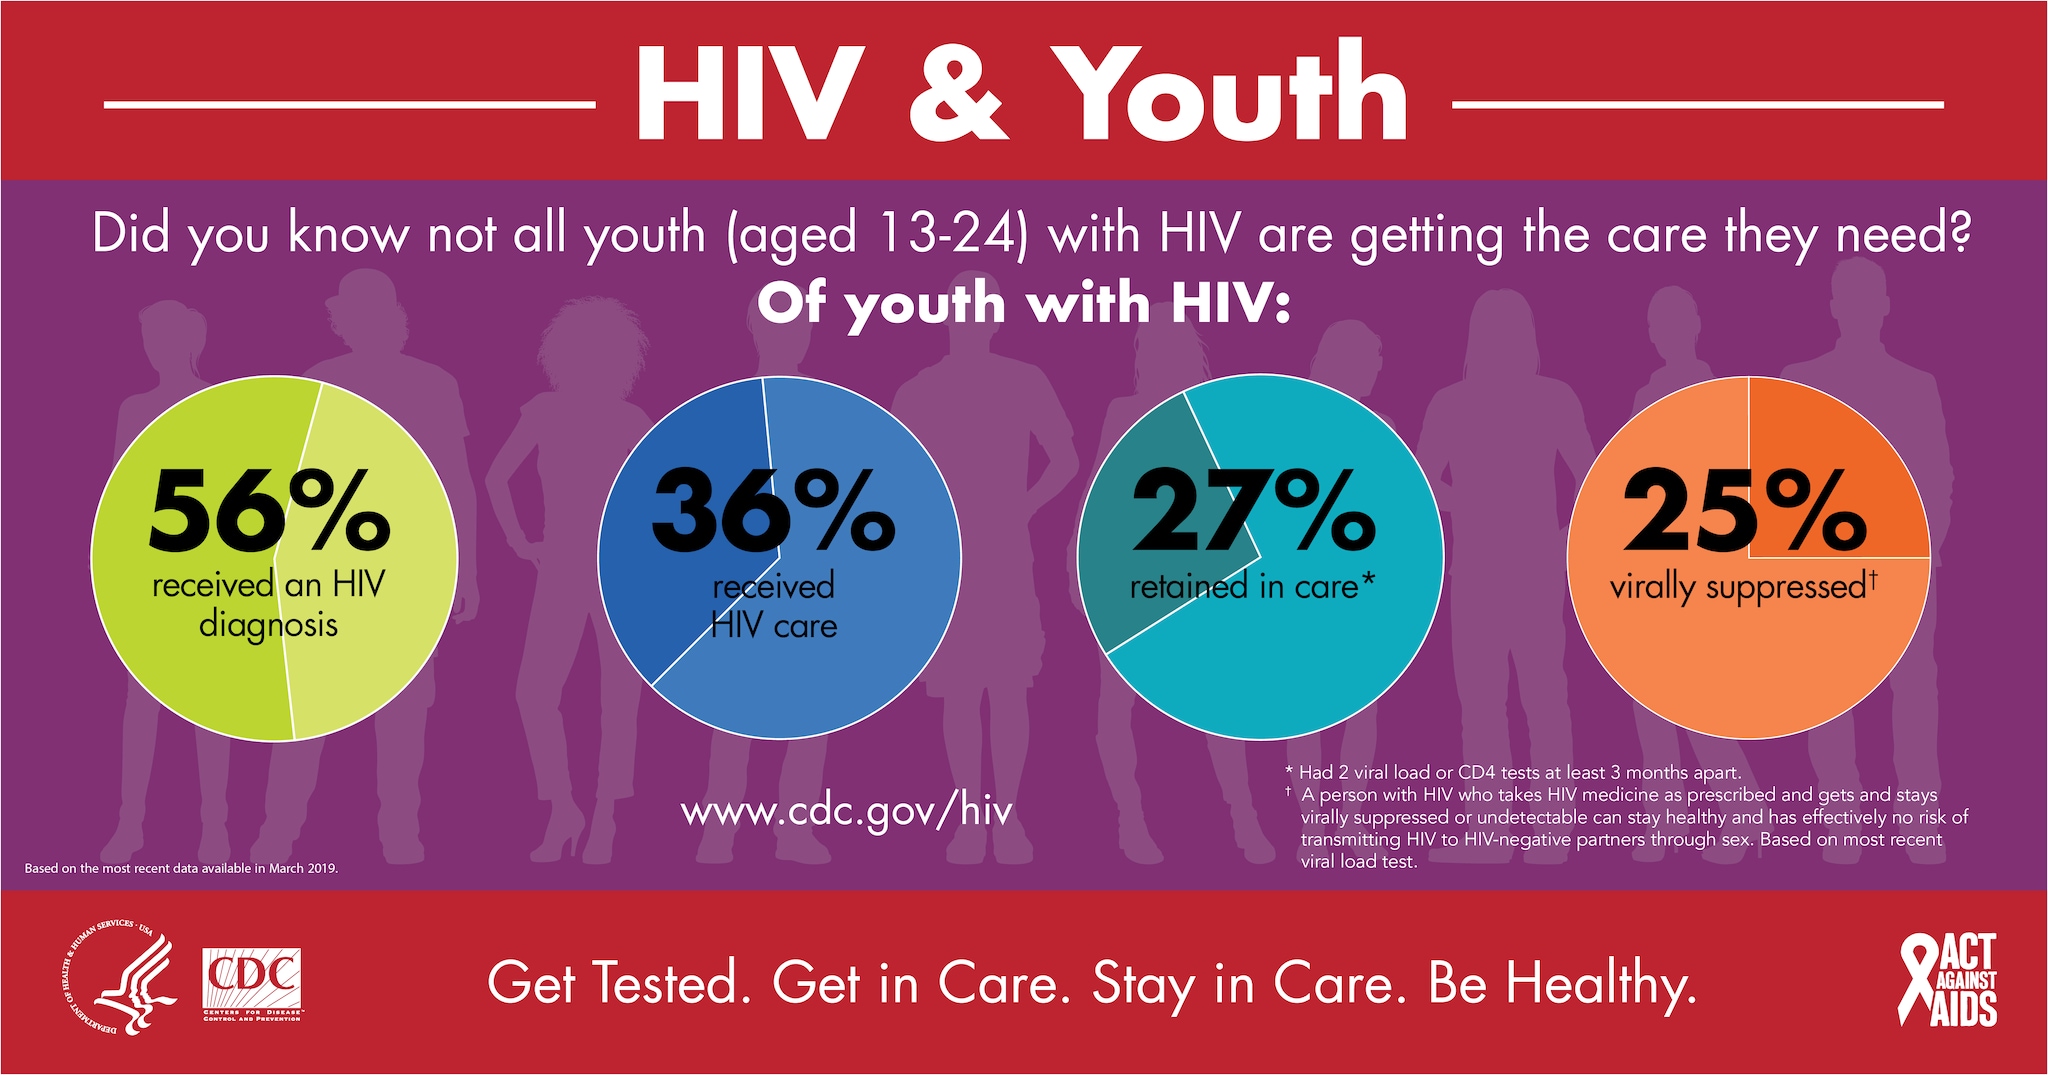 Cdc Hiv And Youth Infographic 